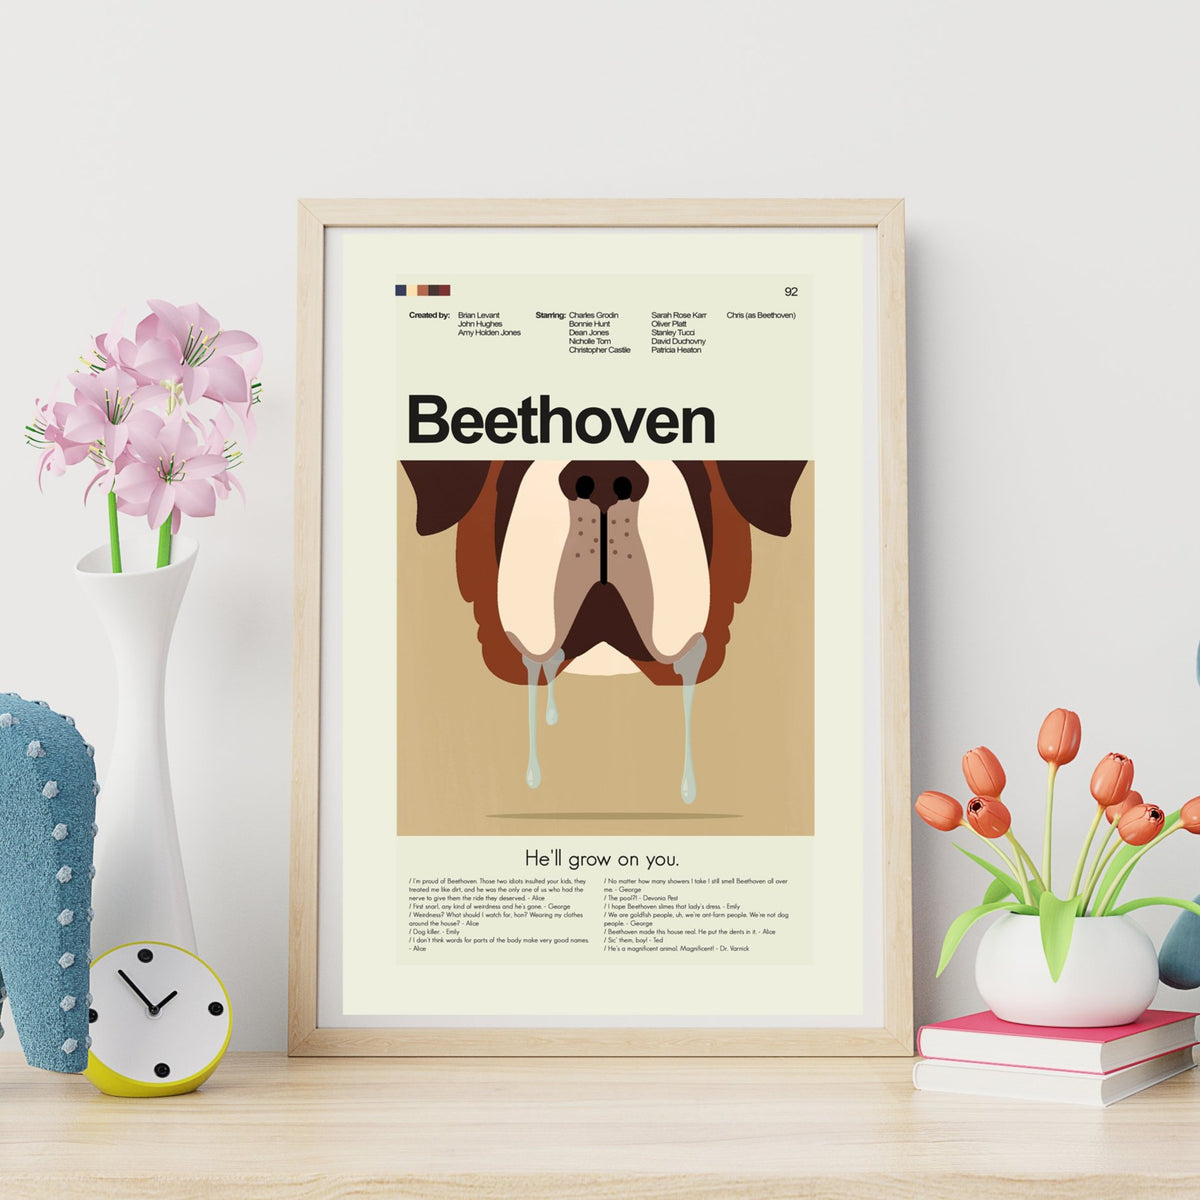 Beethoven Inspired Mid-Century Modern Print | 12"x18" or 18"x24" Print only